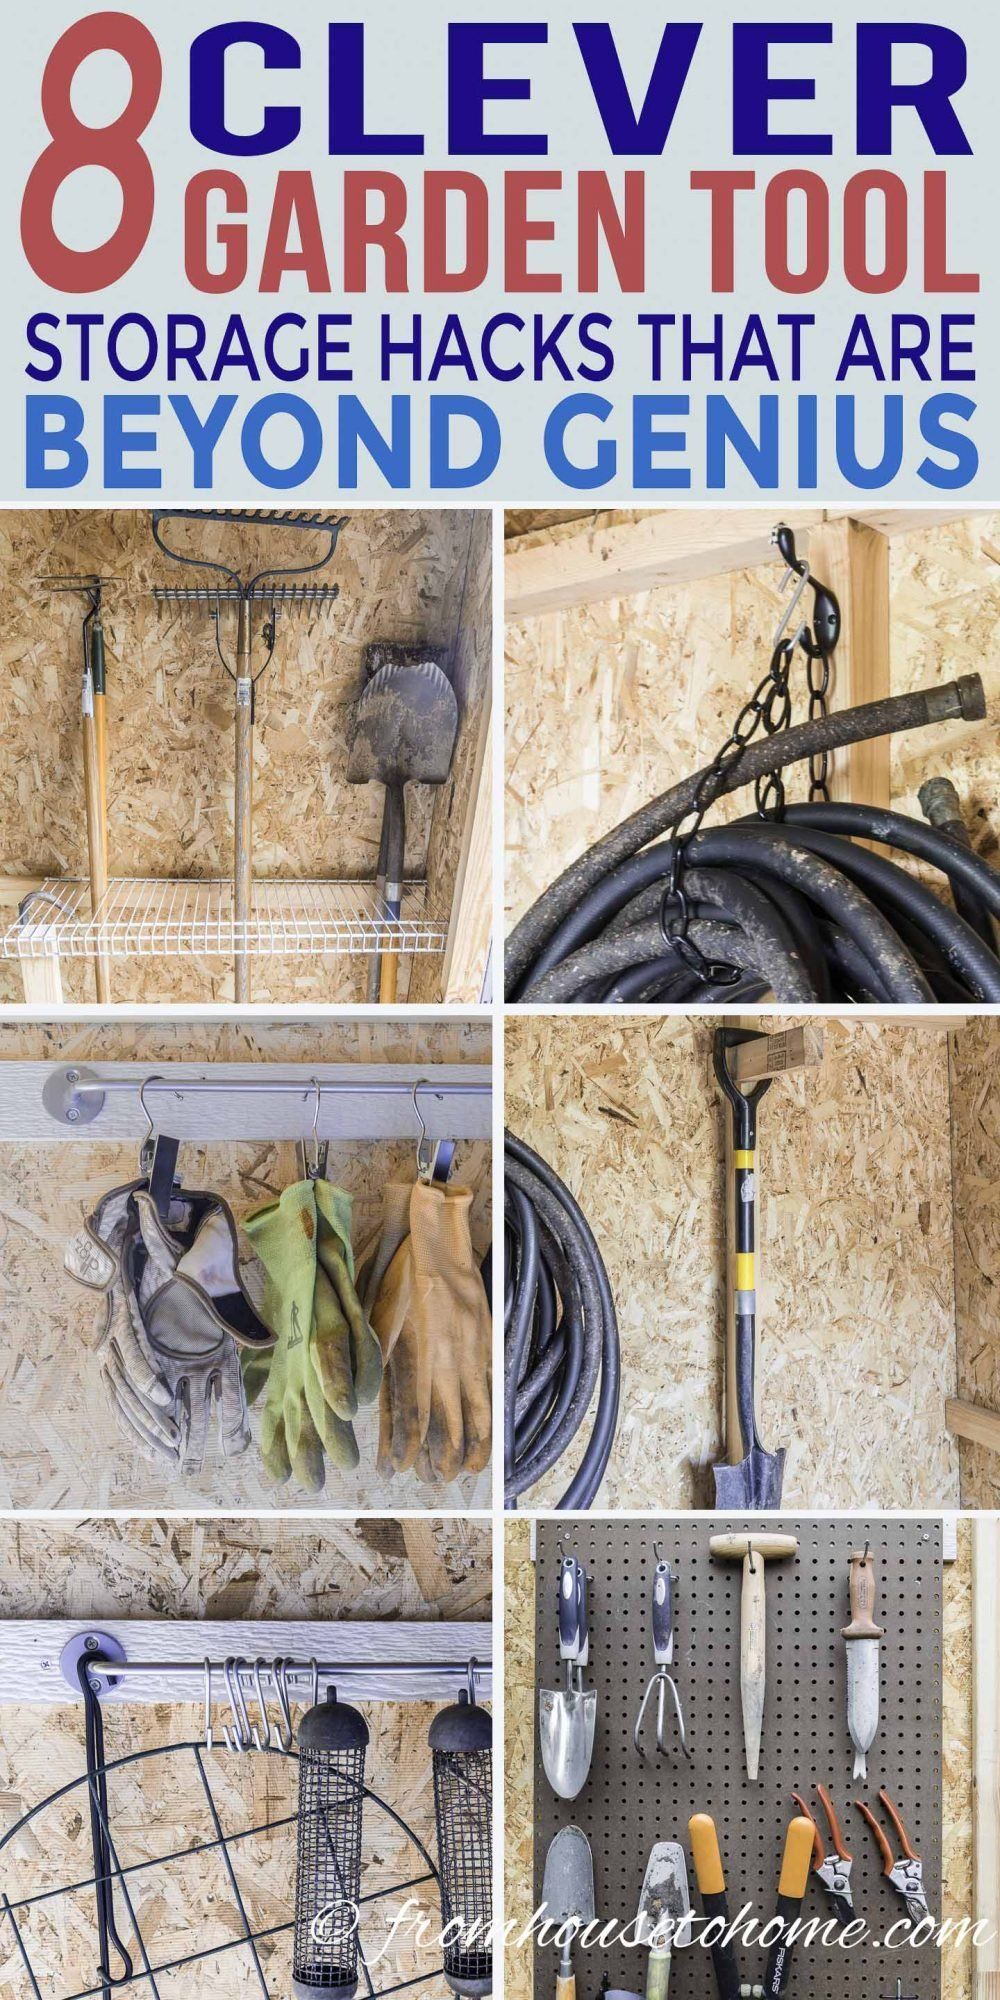 Shed Organization: 8 Easy and Inexpensive DIY Garden Tool Storage Ideas - Gardening @ From House To Home - Shed Organization: 8 Easy and Inexpensive DIY Garden Tool Storage Ideas - Gardening @ From House To Home -   19 diy Storage tools ideas